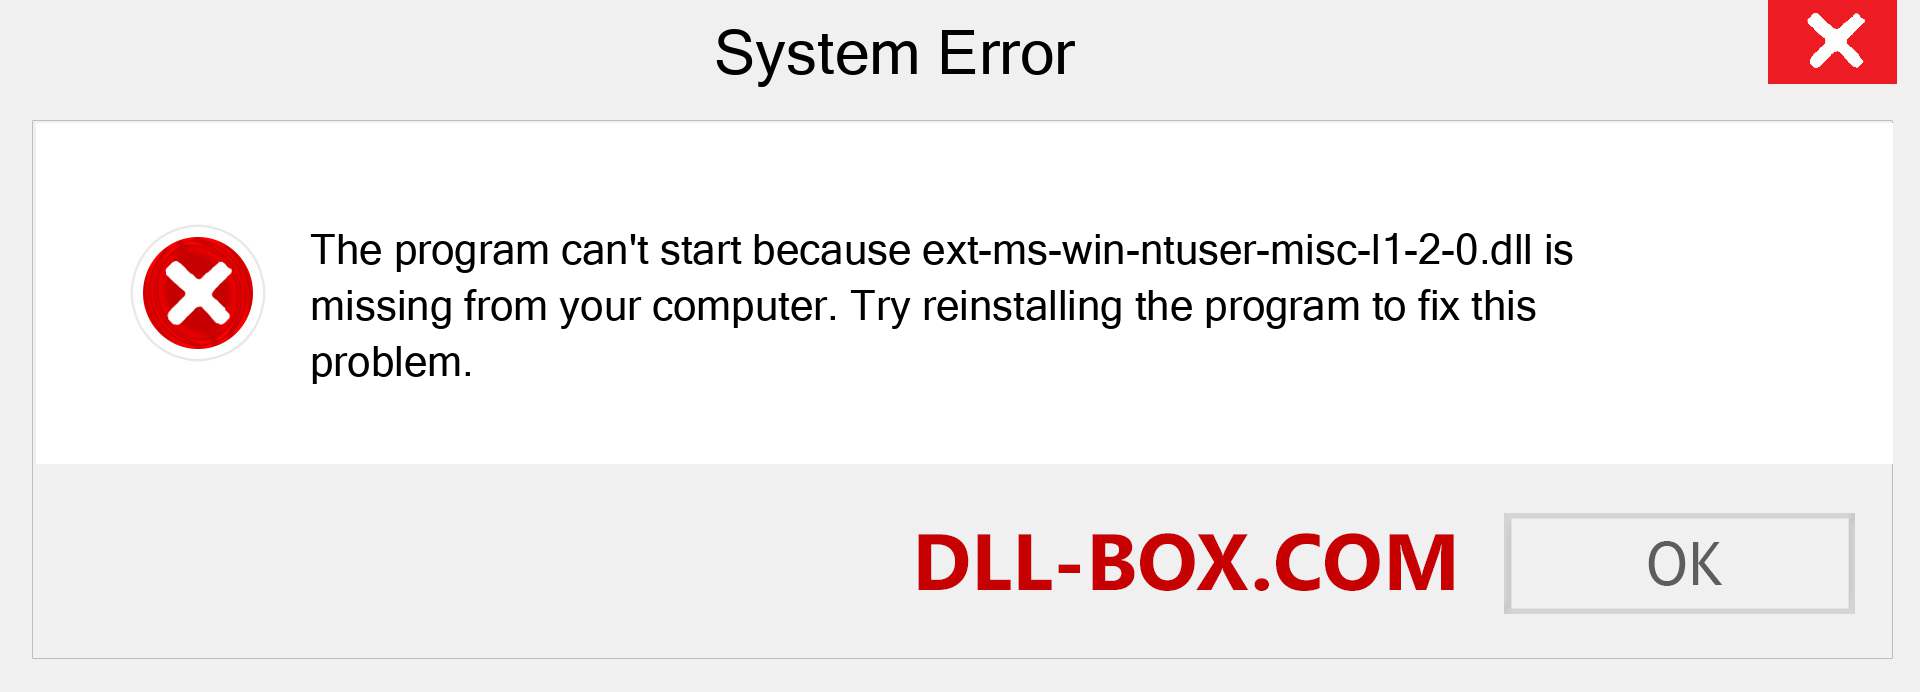  ext-ms-win-ntuser-misc-l1-2-0.dll file is missing?. Download for Windows 7, 8, 10 - Fix  ext-ms-win-ntuser-misc-l1-2-0 dll Missing Error on Windows, photos, images